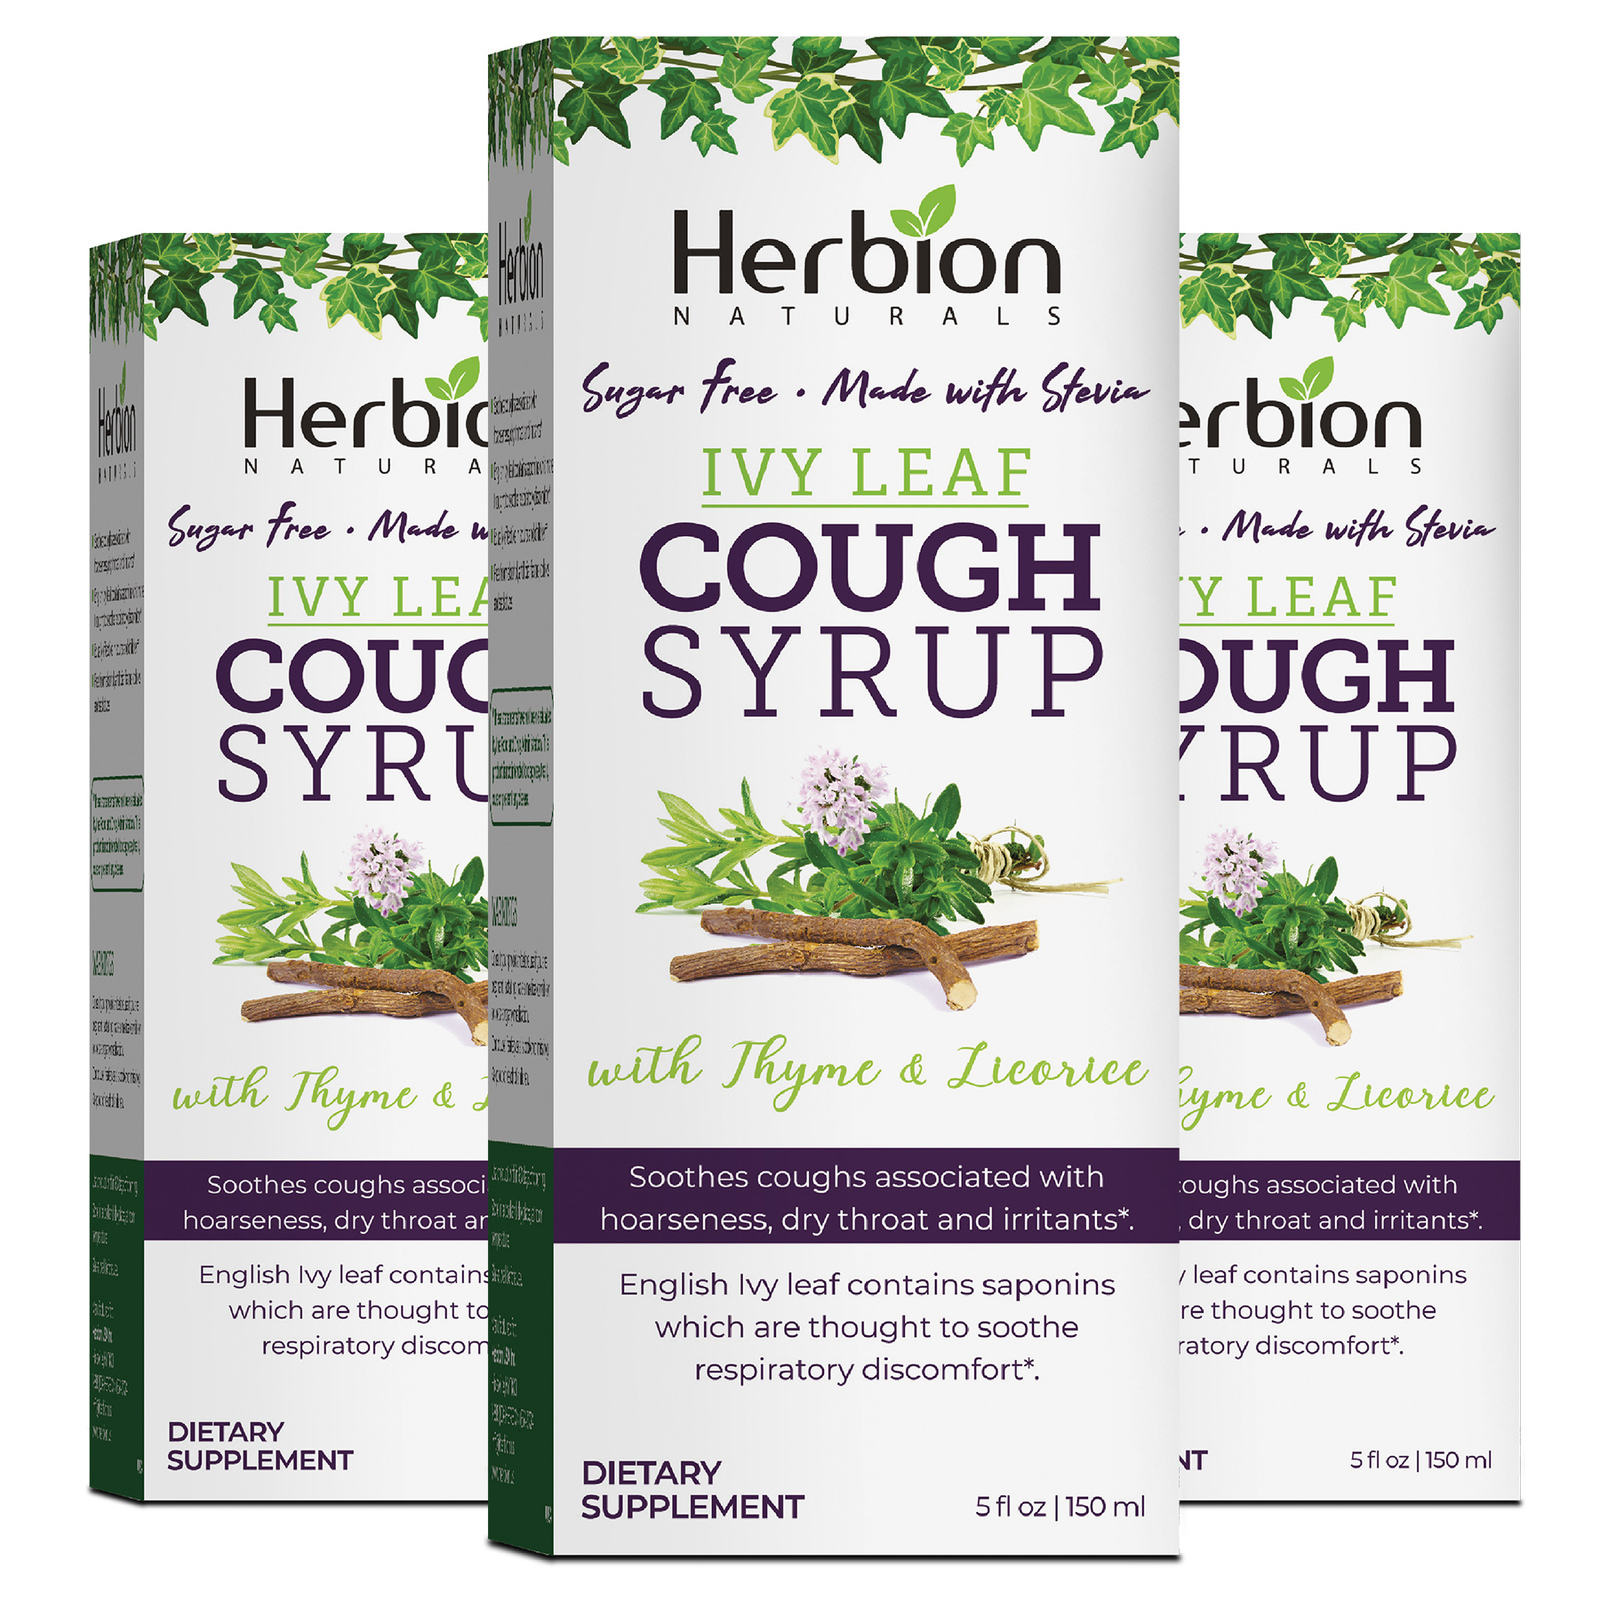 Herbion Naturals Ivy Leaf Cough Syrup with Thyme 5 fl oz